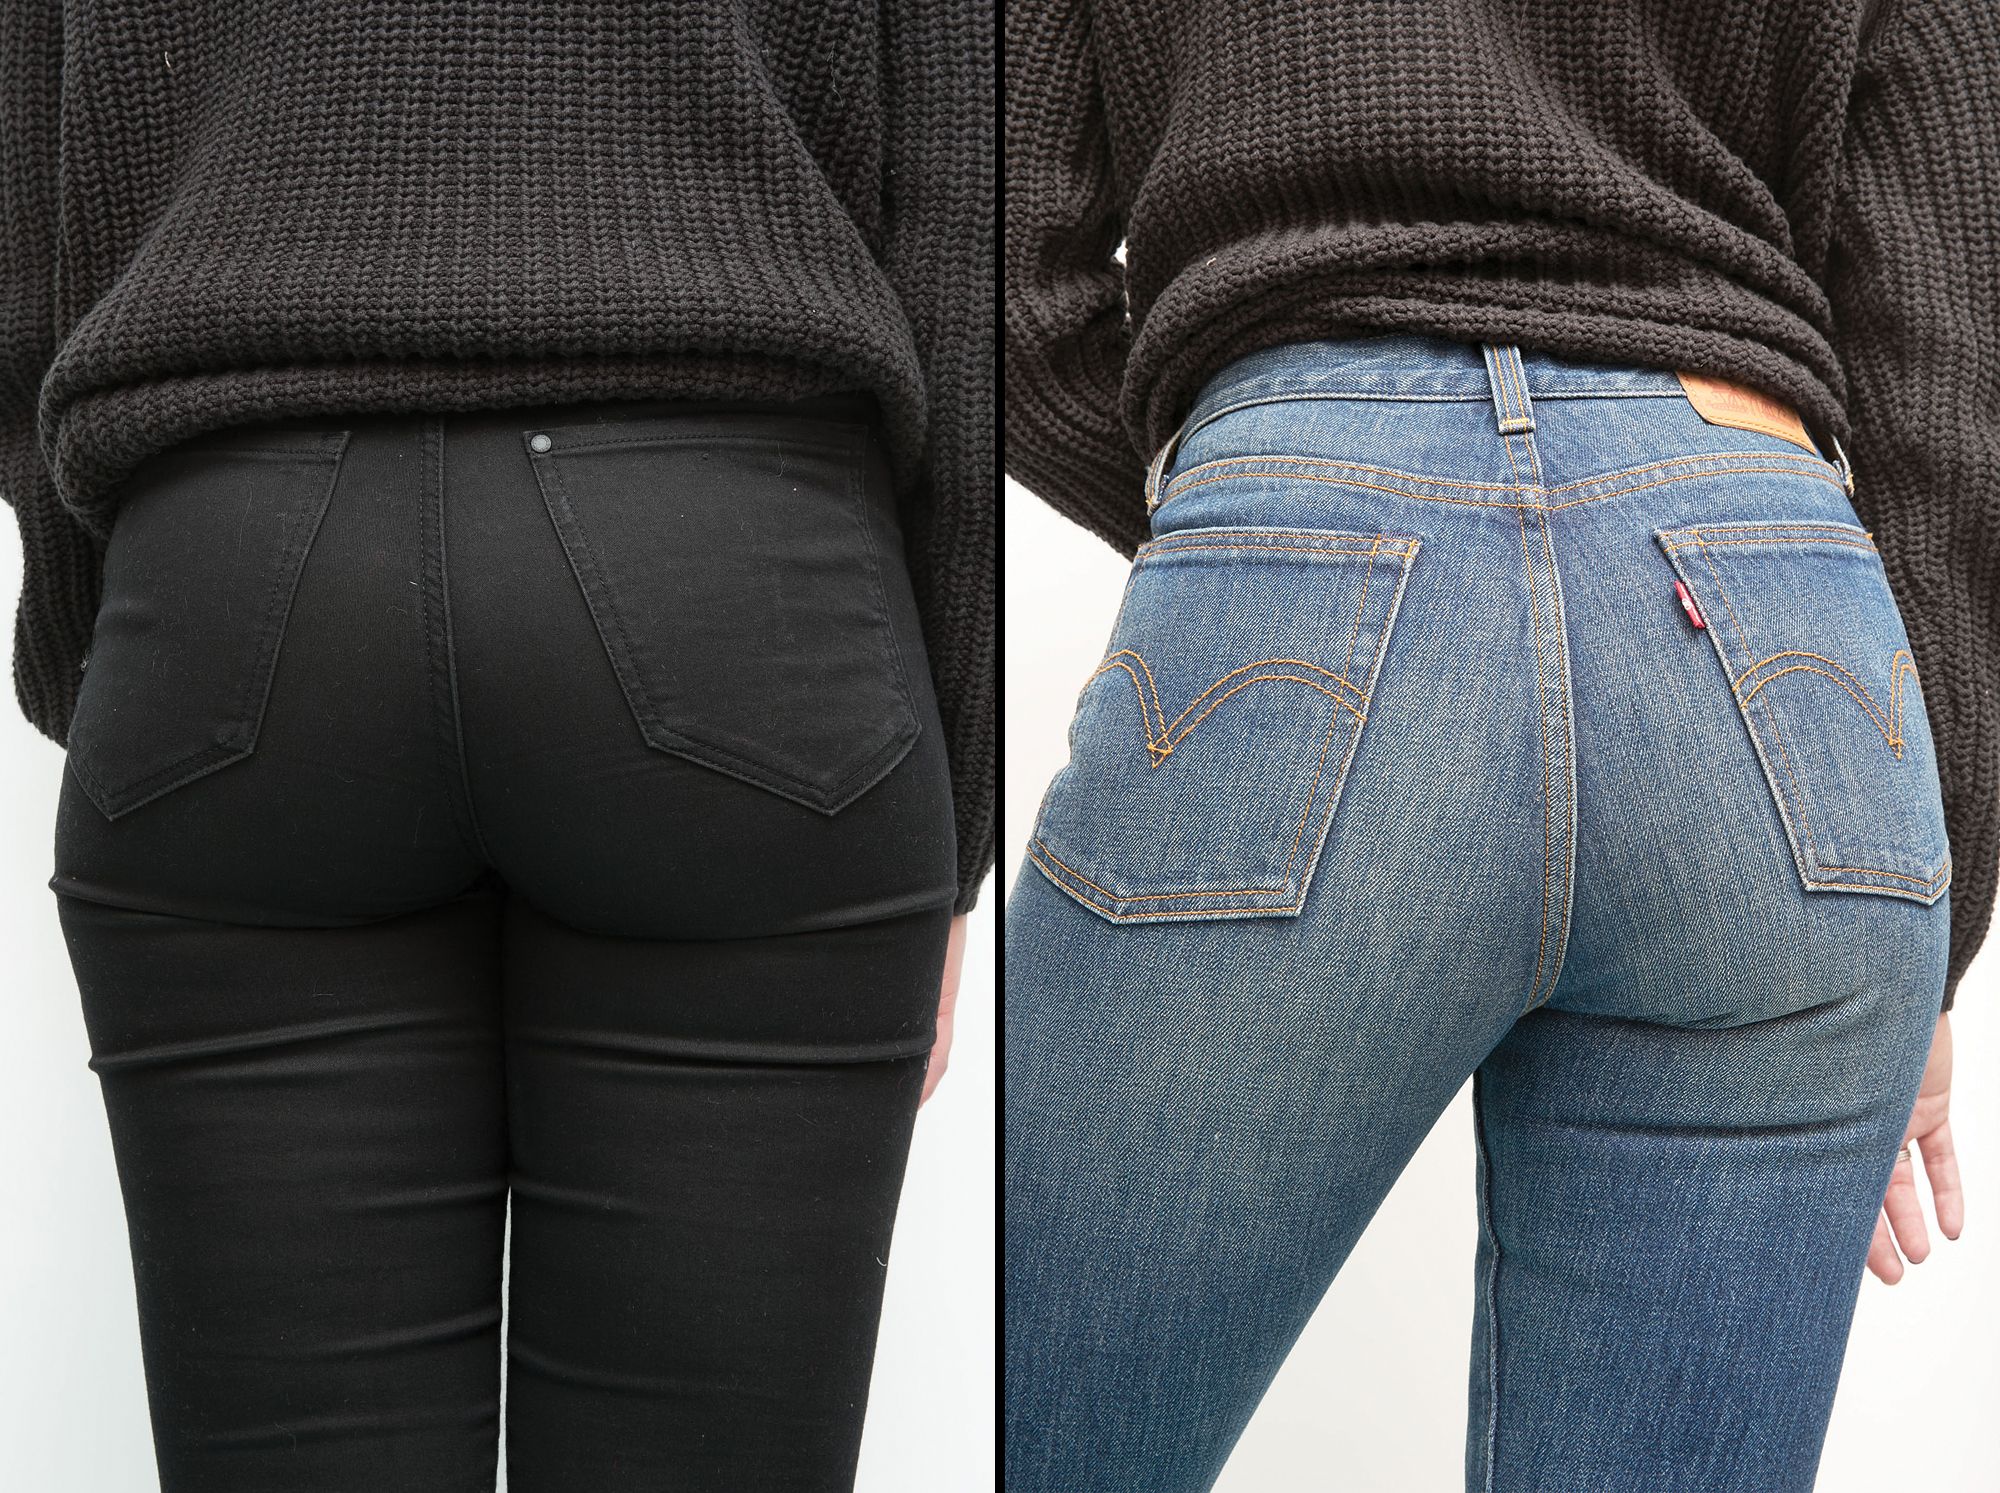 10 People Tried Jeans They Were Pretty Magical